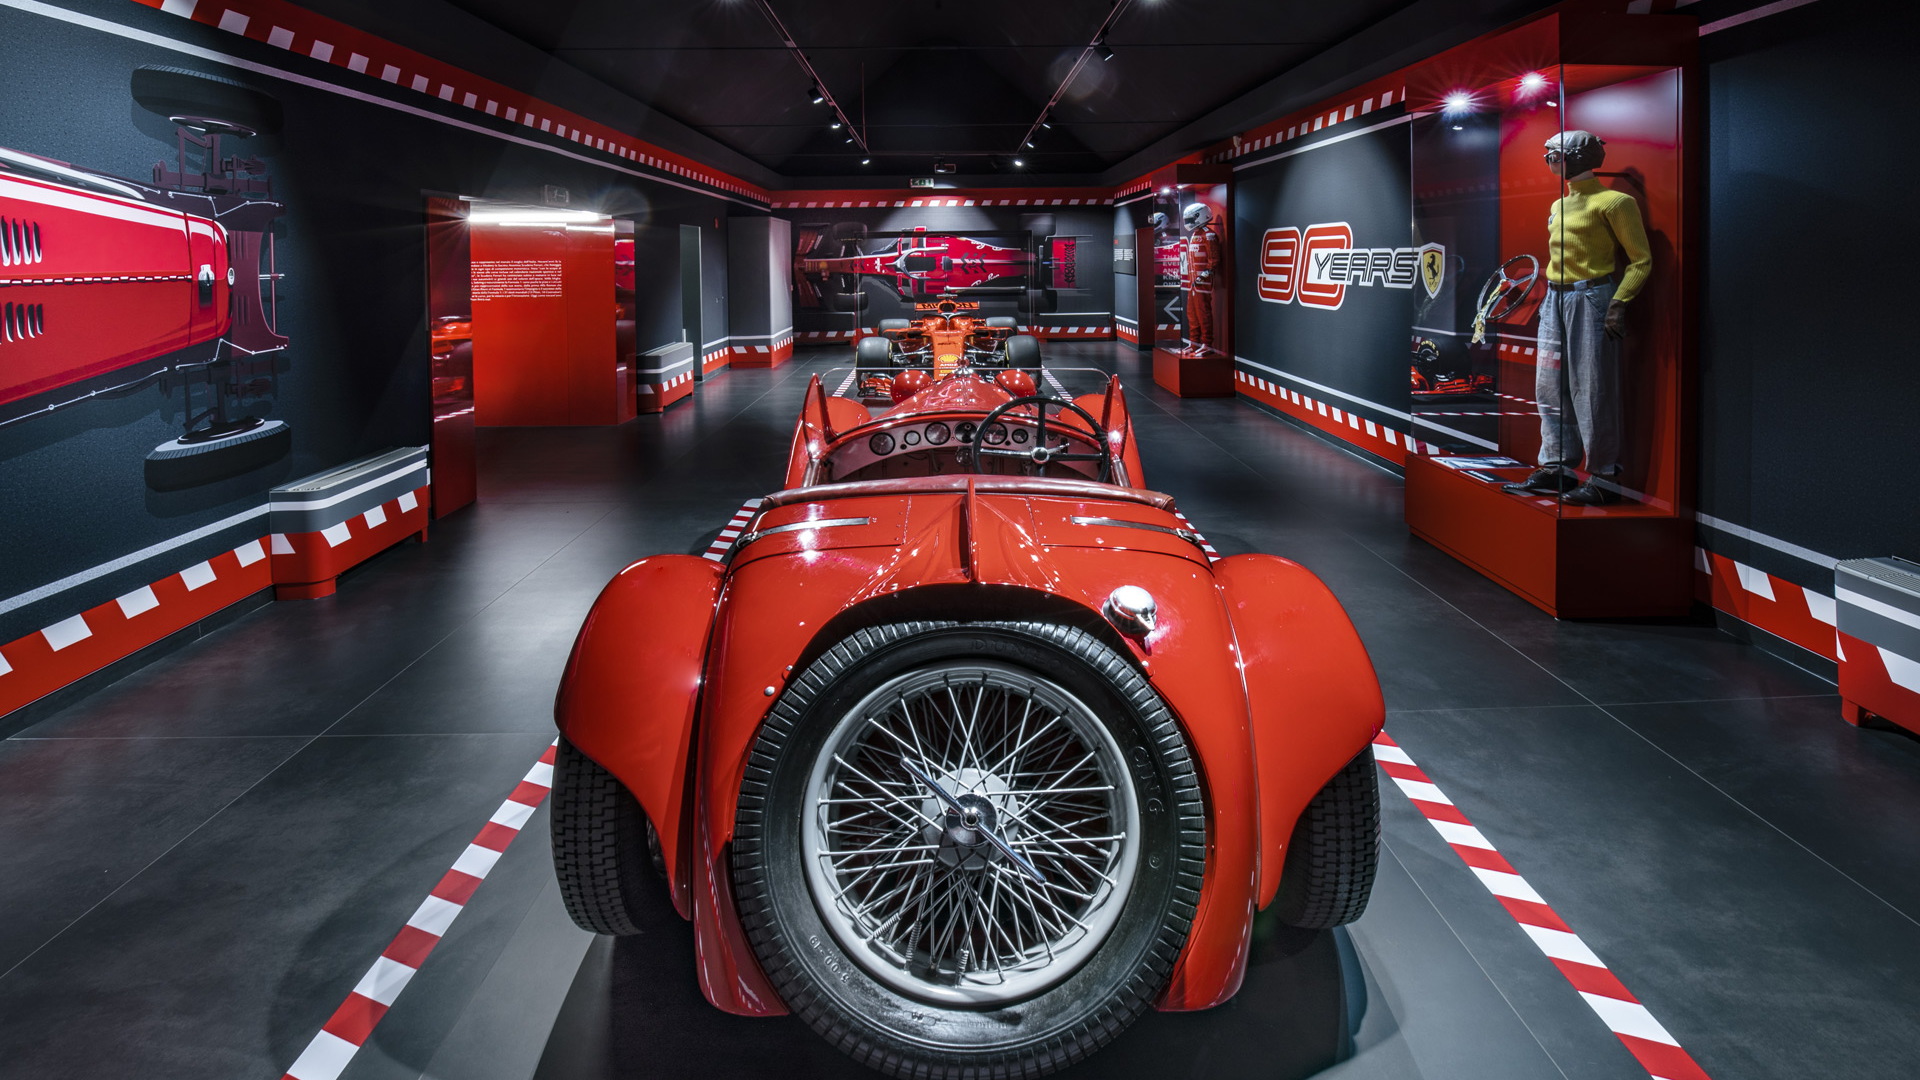 “90 Years Exhibition” at the Ferrari Museum in Maranello, Italy